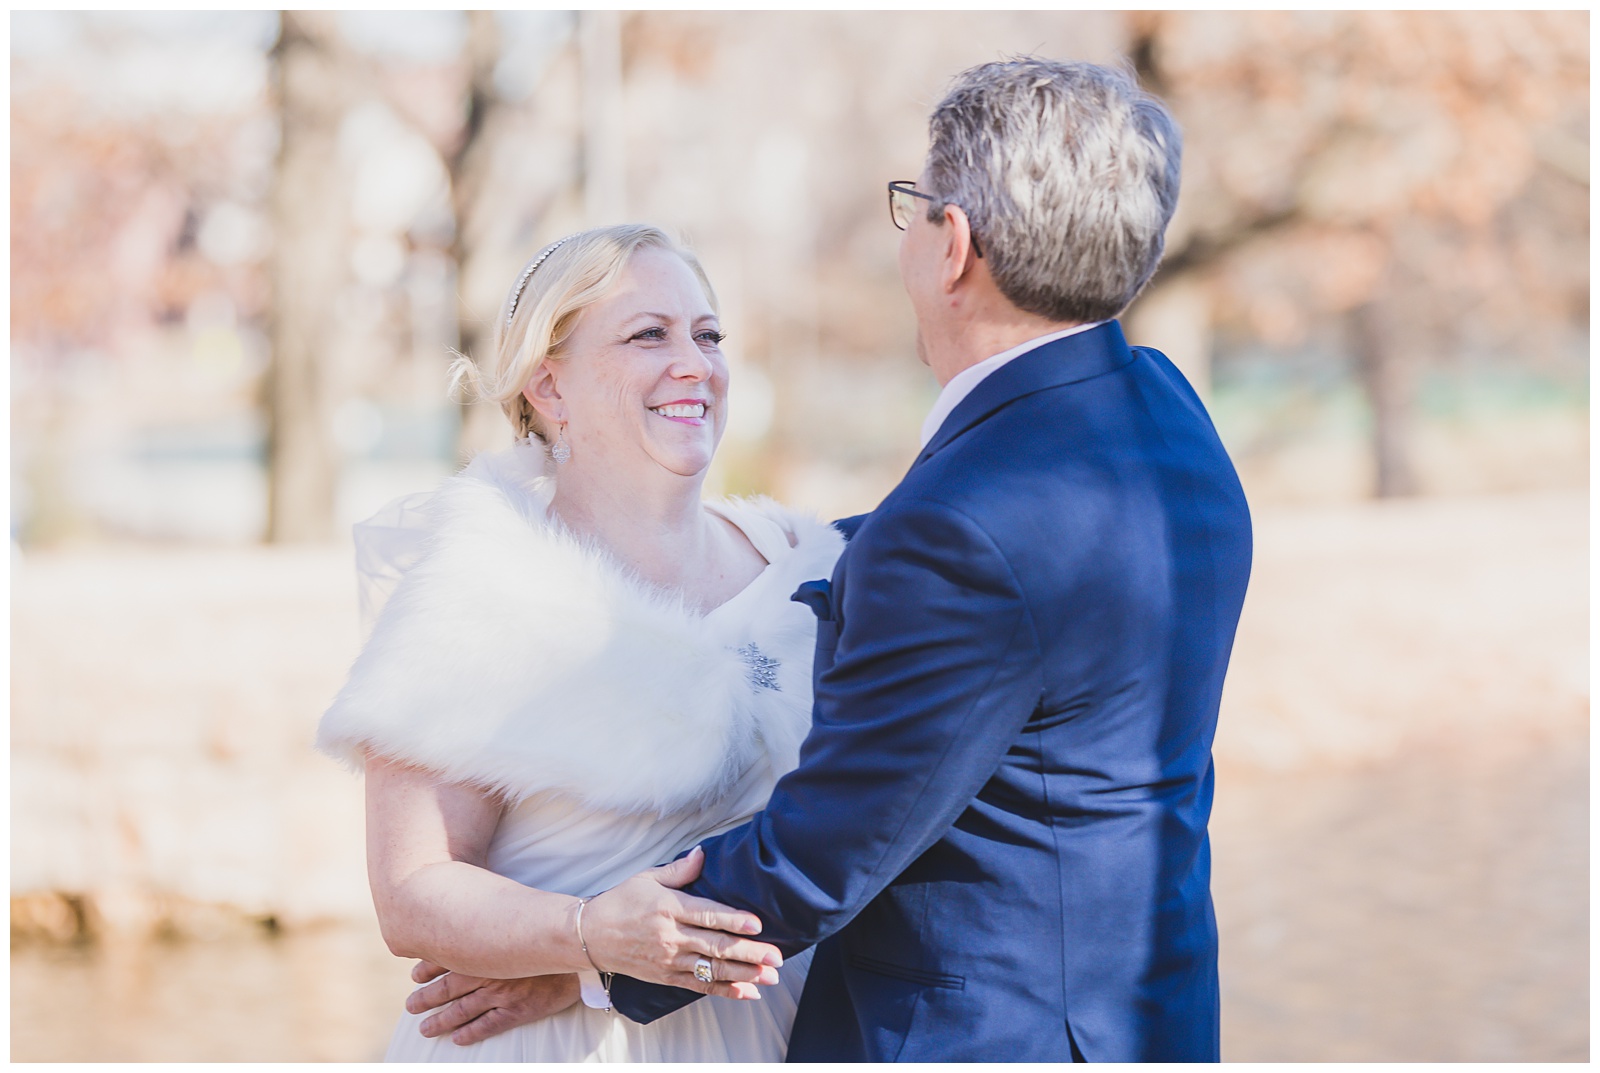 Wedding photography in Lawrence, Kansas, by Kansas City wedding photographers Wisdom-Watson Weddings.